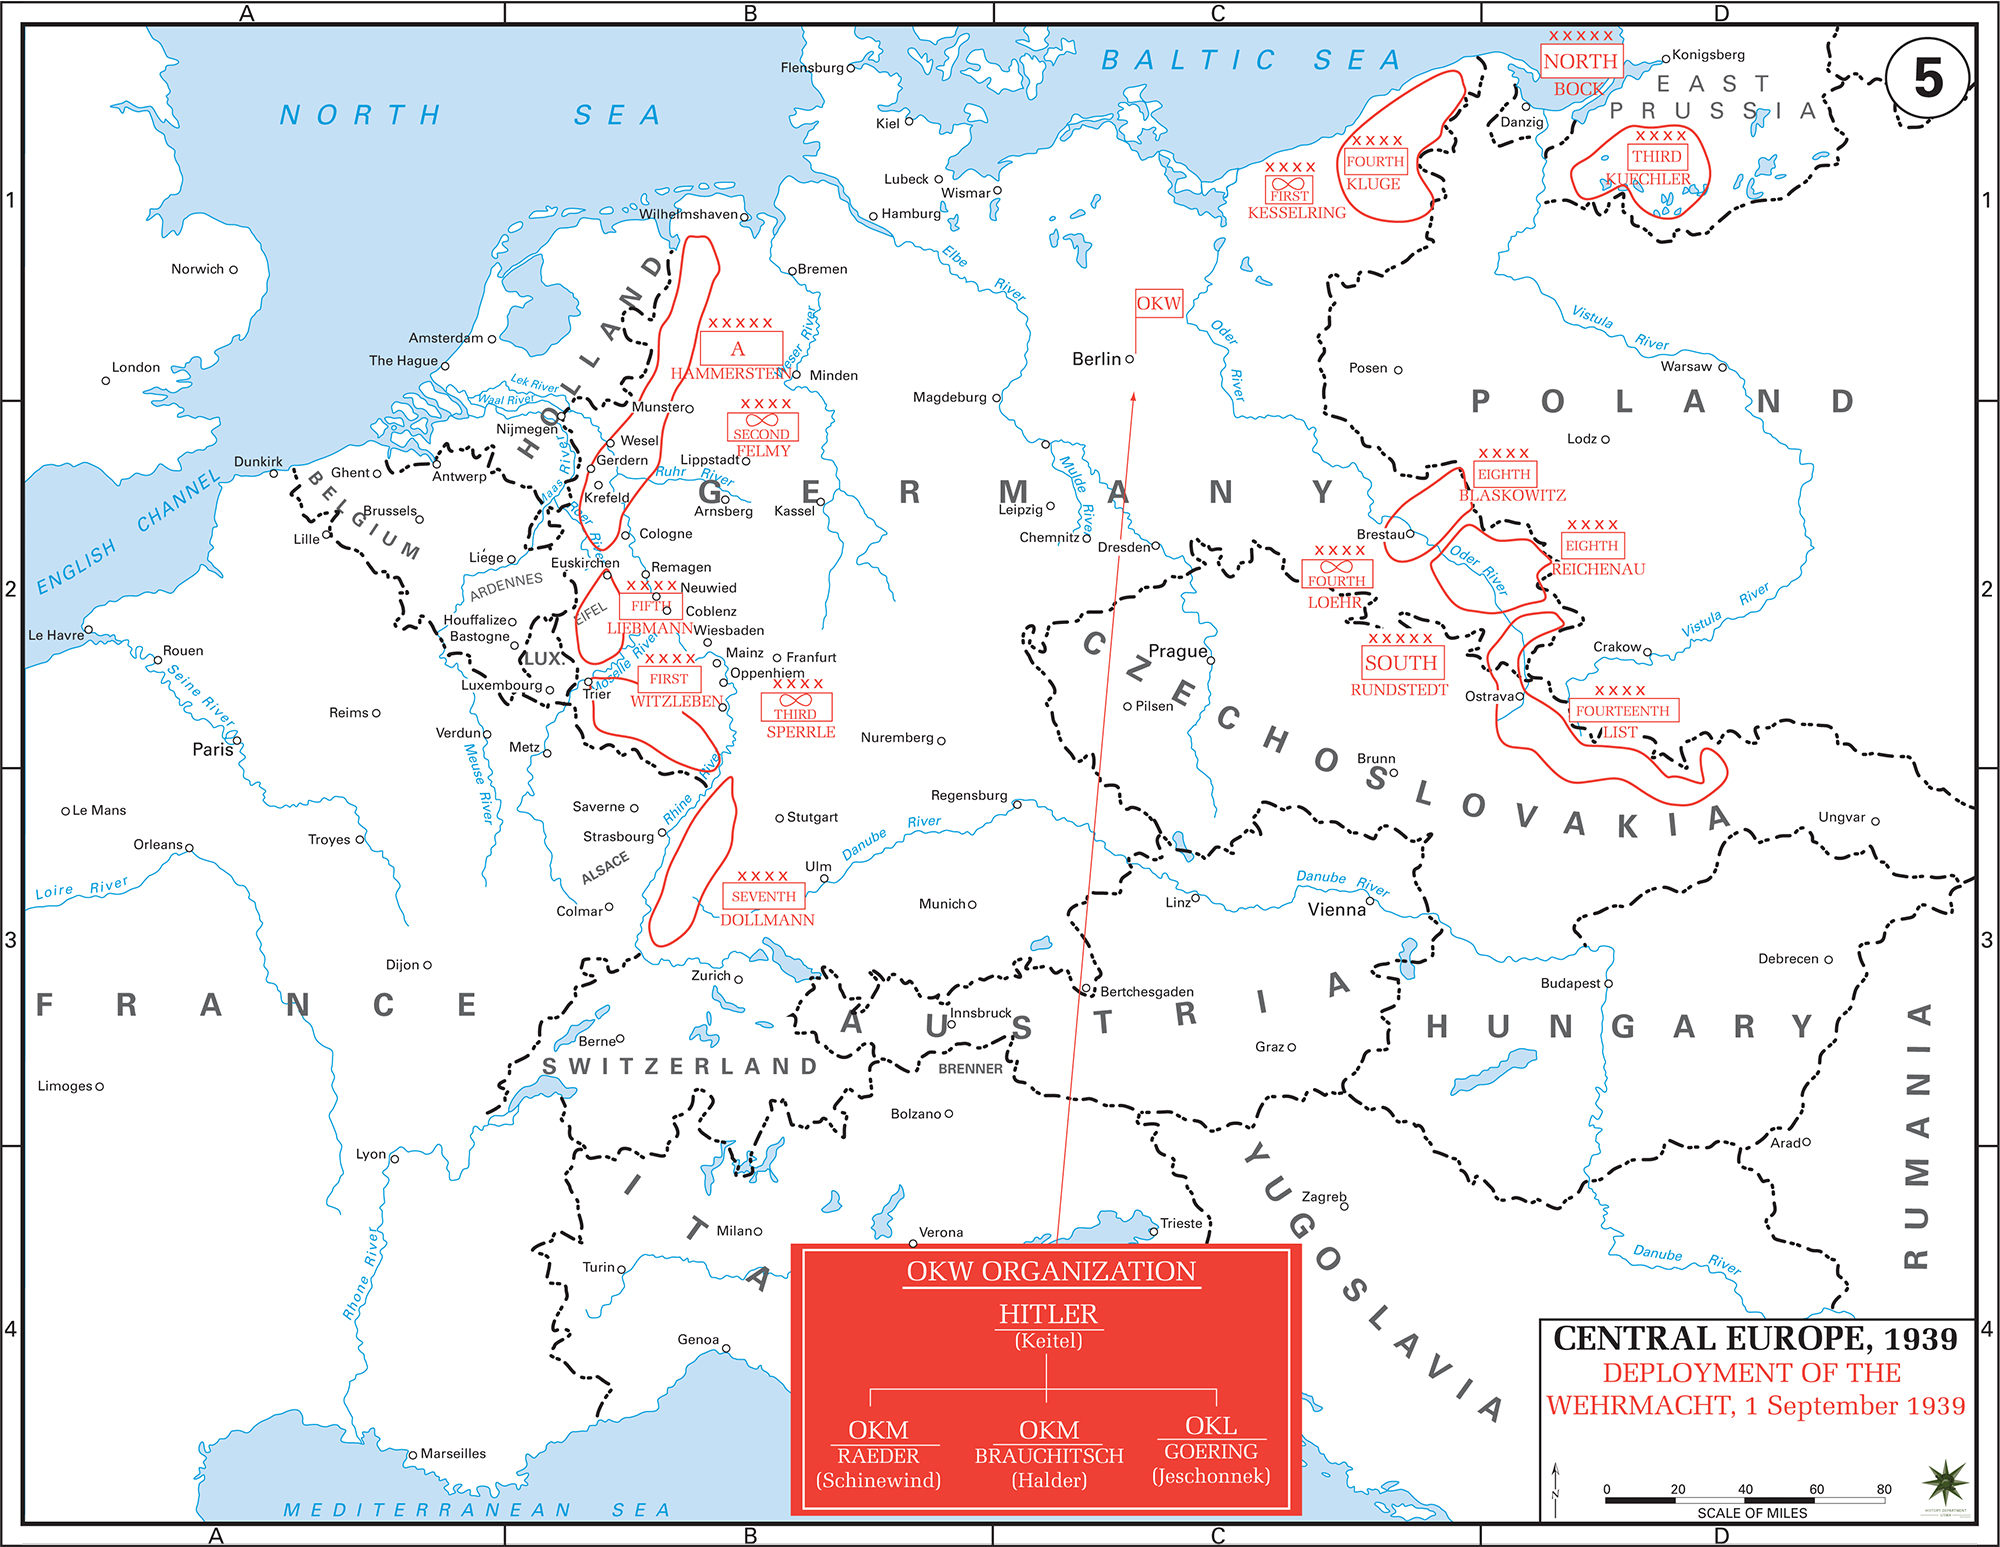 History Map of WWII: Central Europe 1939 - Wehrmacht